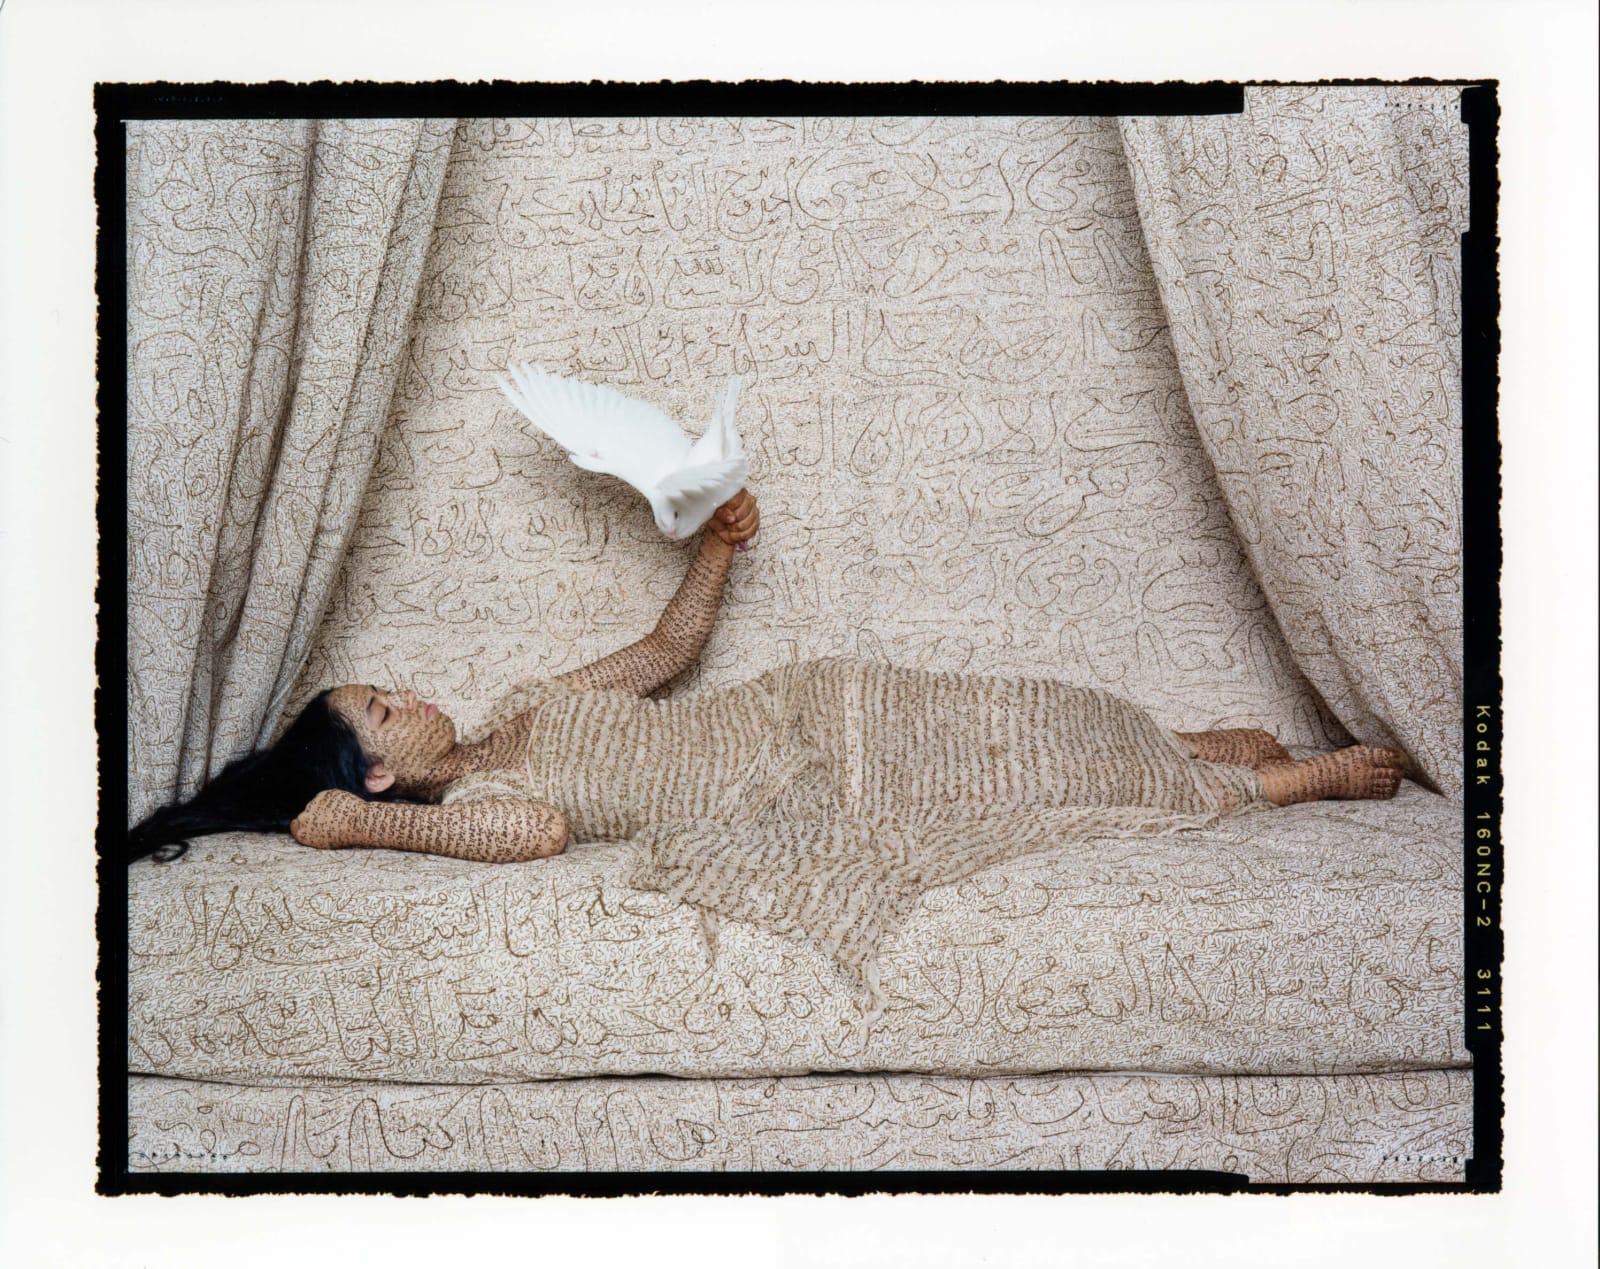 Reclining woman with white dove flying from hand, from Les Femmes du Maroc series by Lalla Essaydi